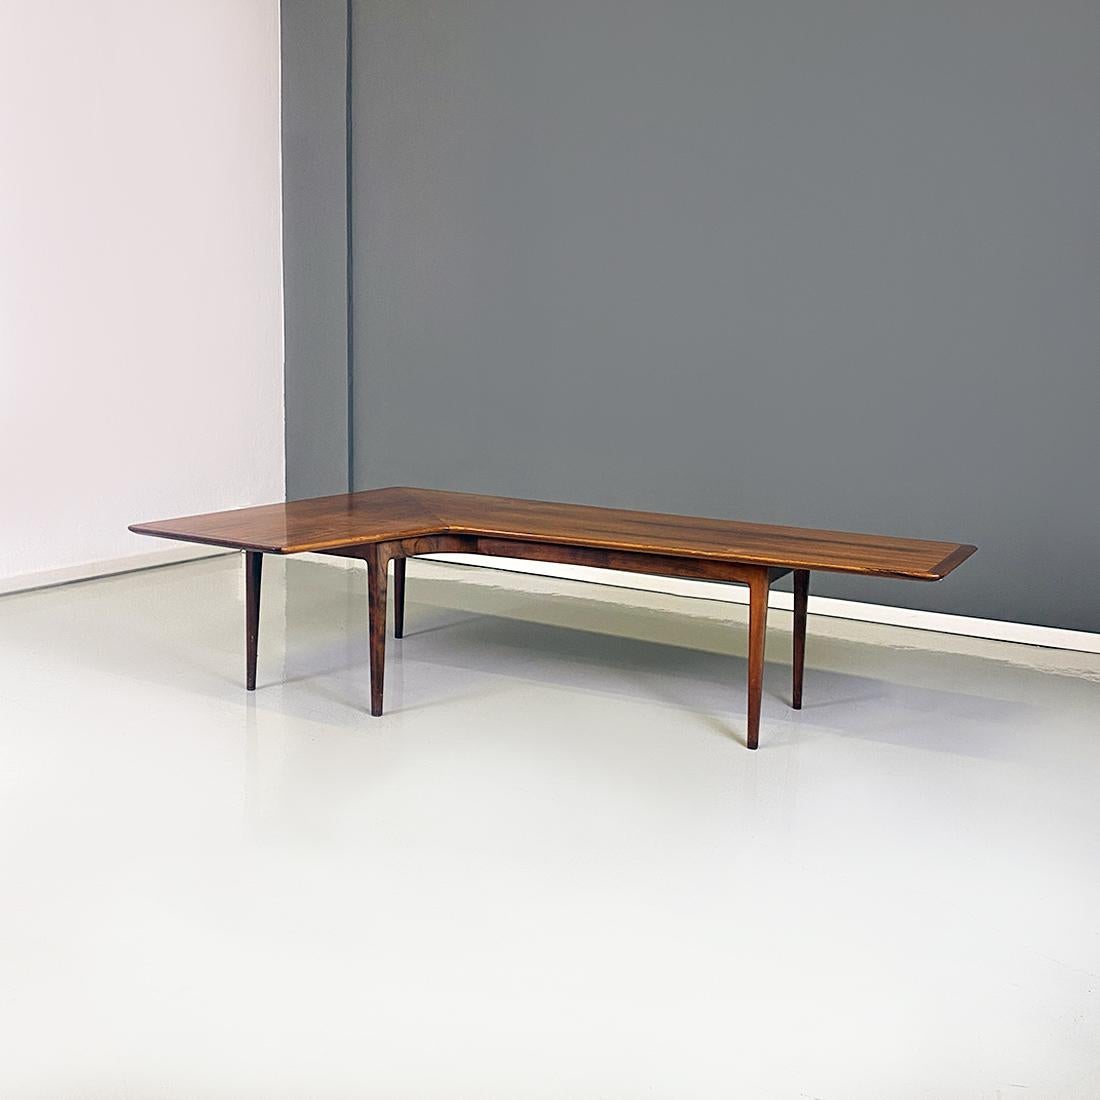 Italian Mid-Century Modern Solid Wood Coffee Table with a Boomerang Shape, 1960s 5